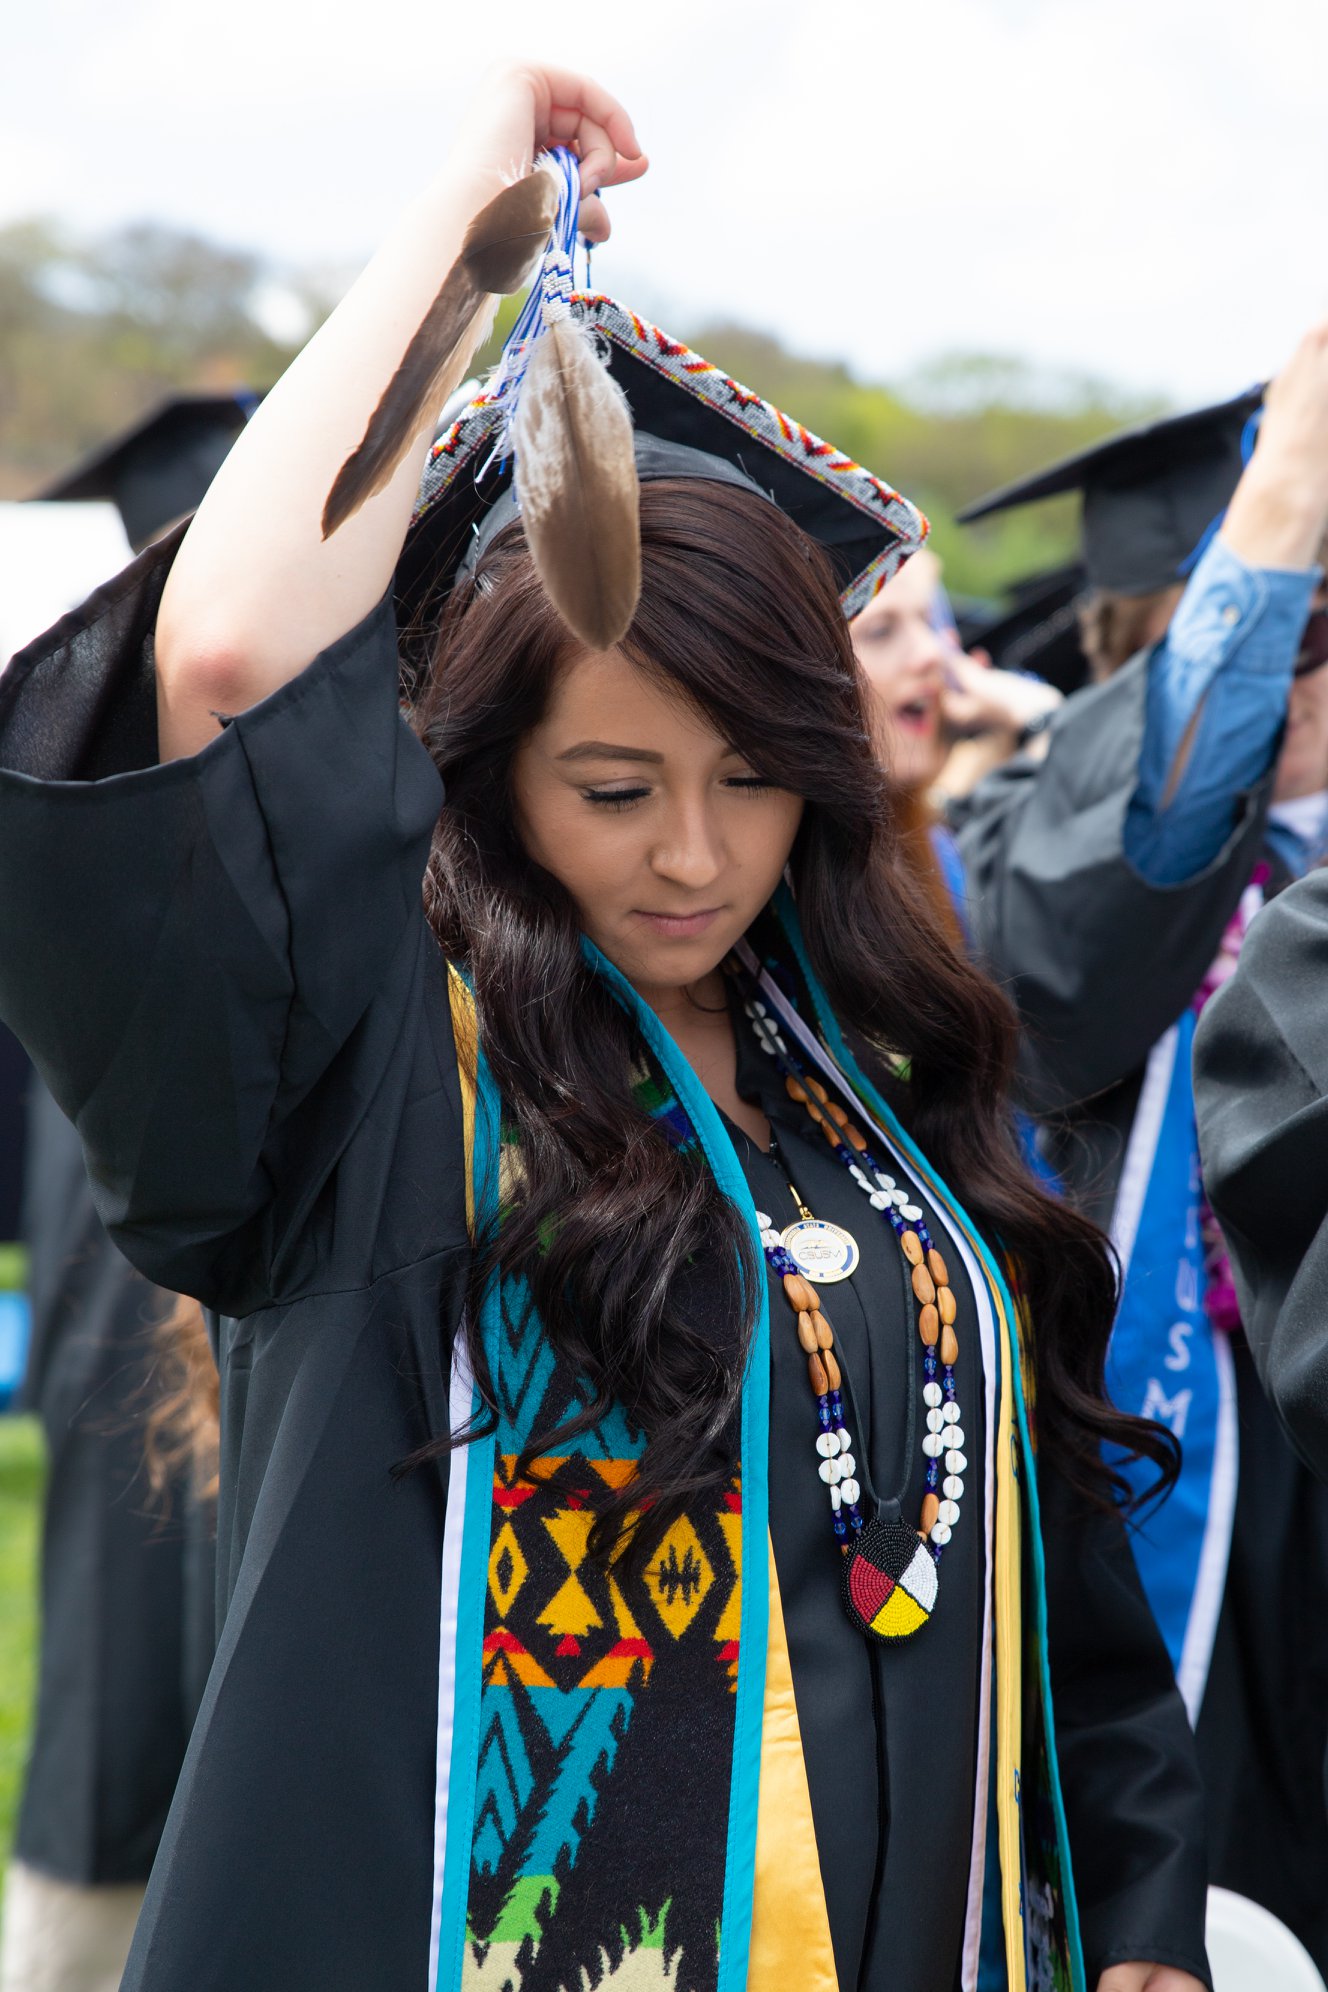 Graduate Rachelle Peterson in her cap and gown at graduation, wearing a multicolored pendleton stole and holding the feather on her graduation cap above her bowed head